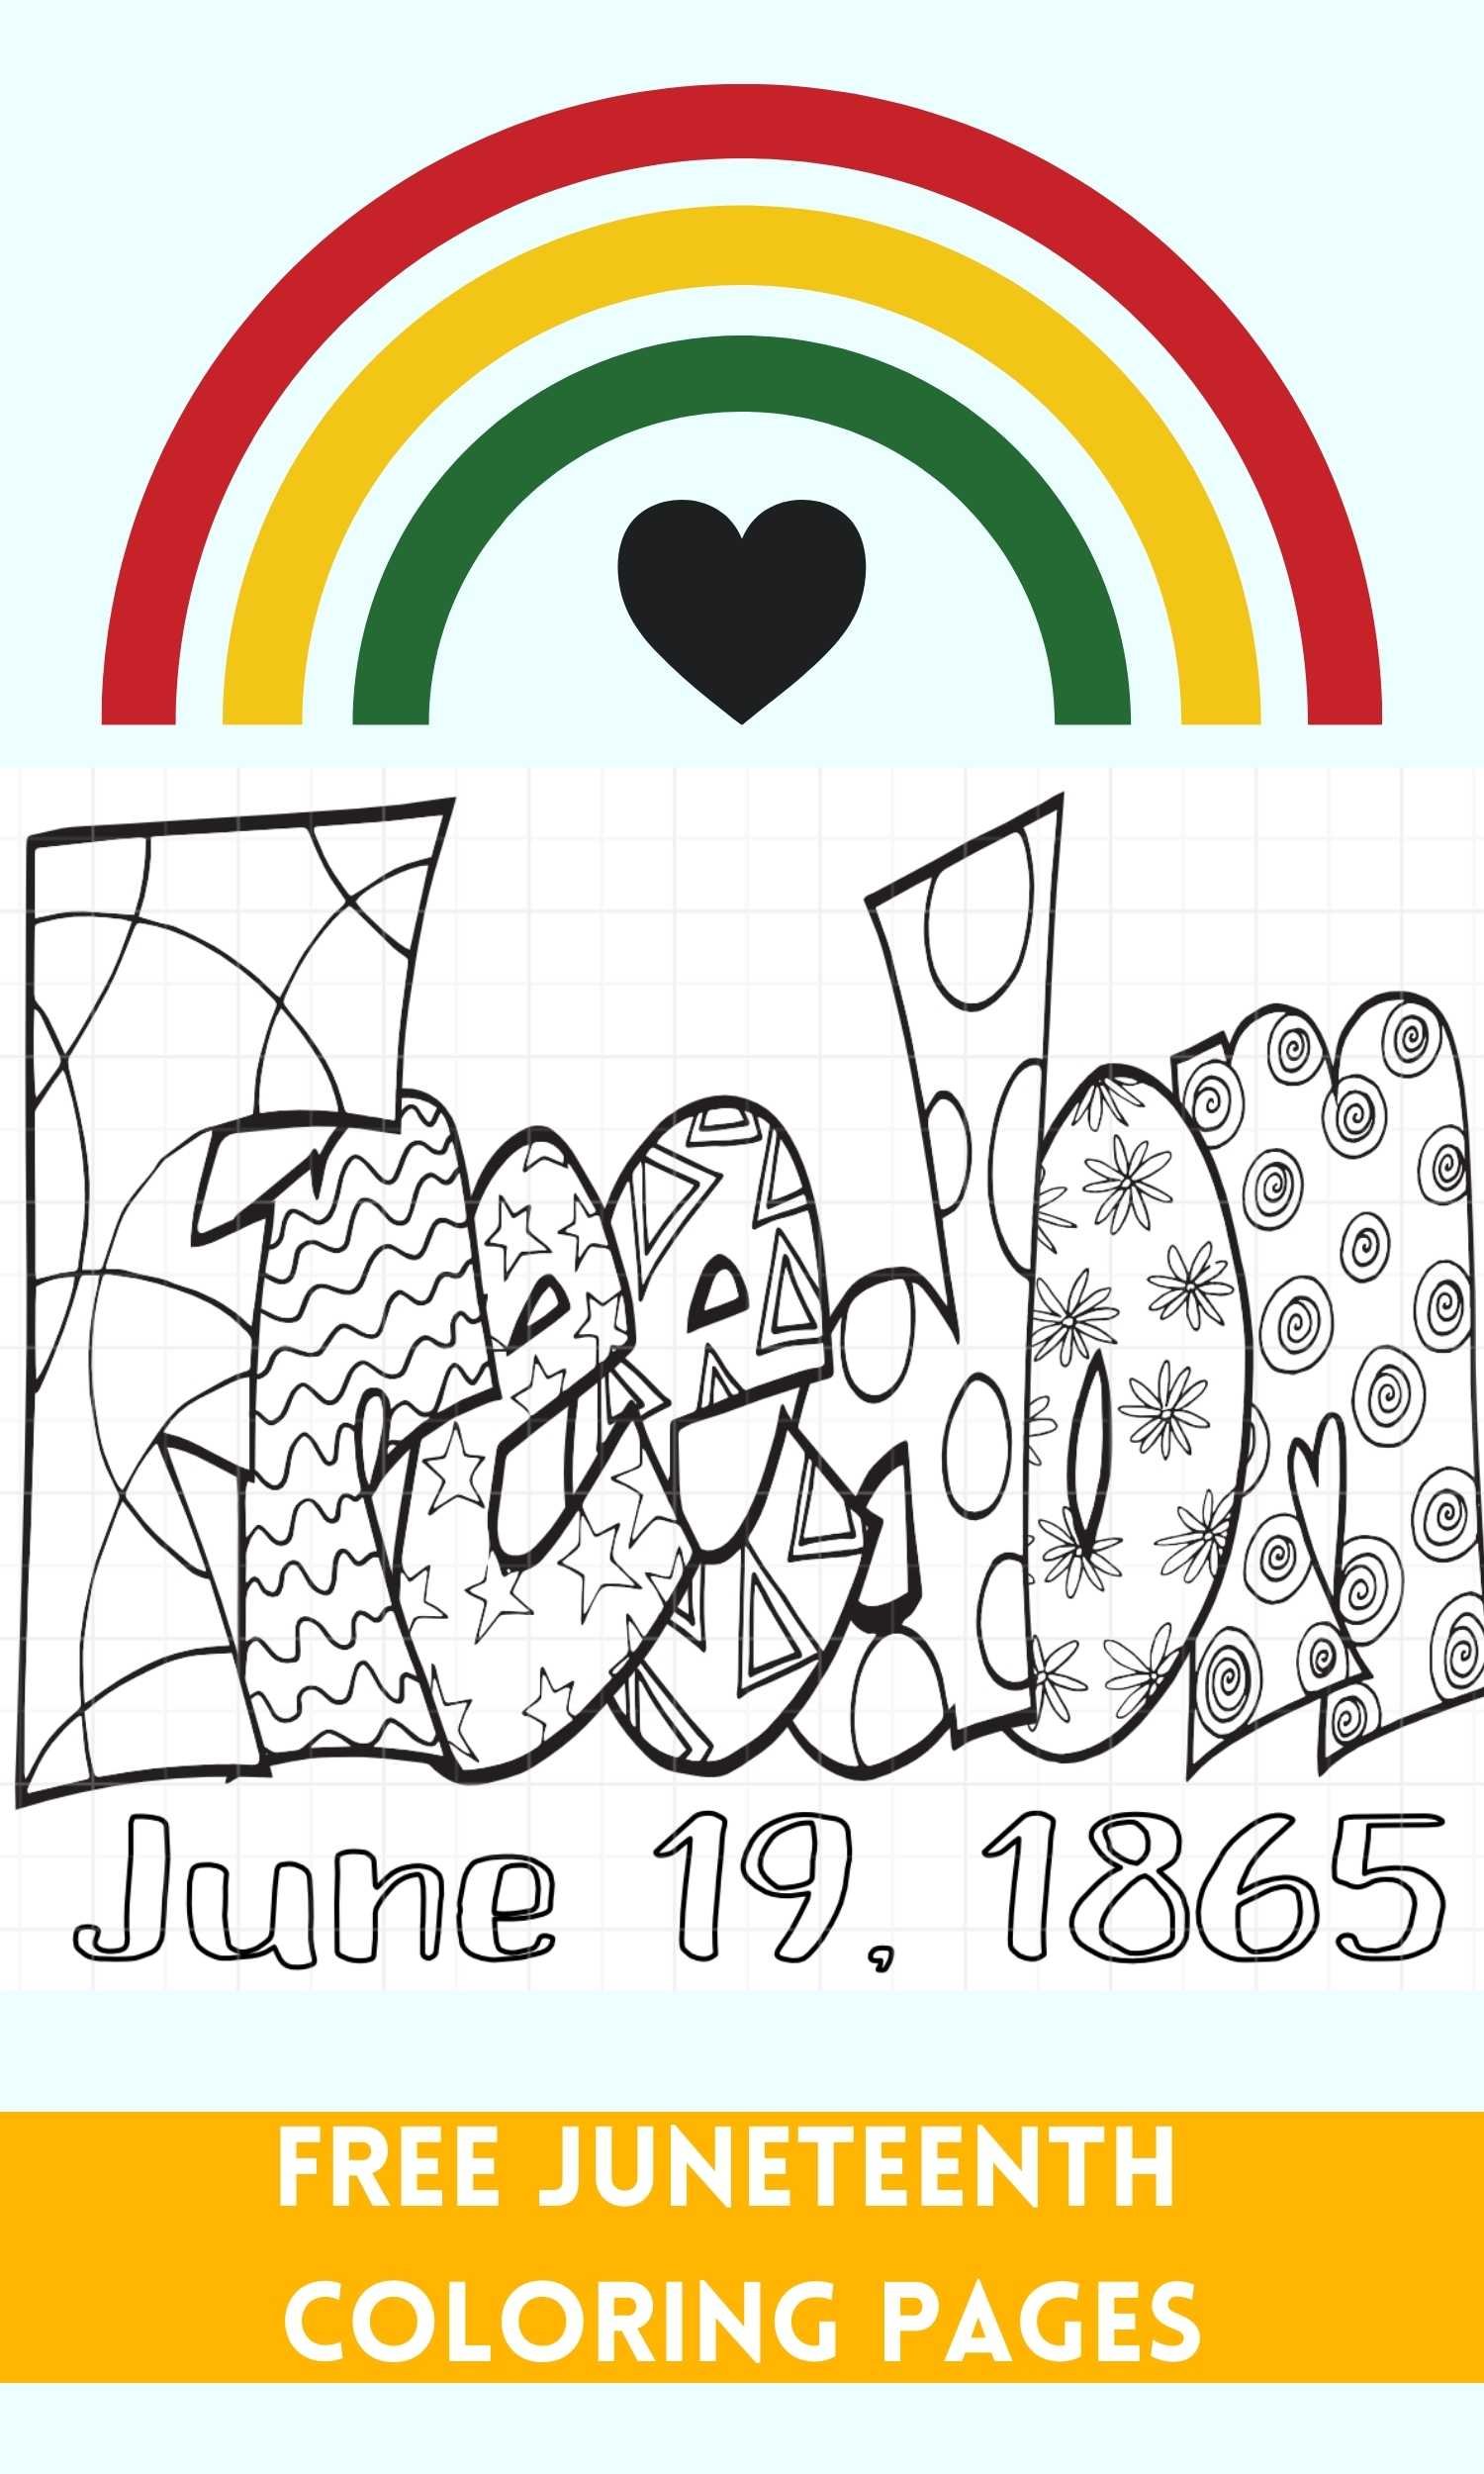 free-juneteenth-coloring-pages-stevie-doodles